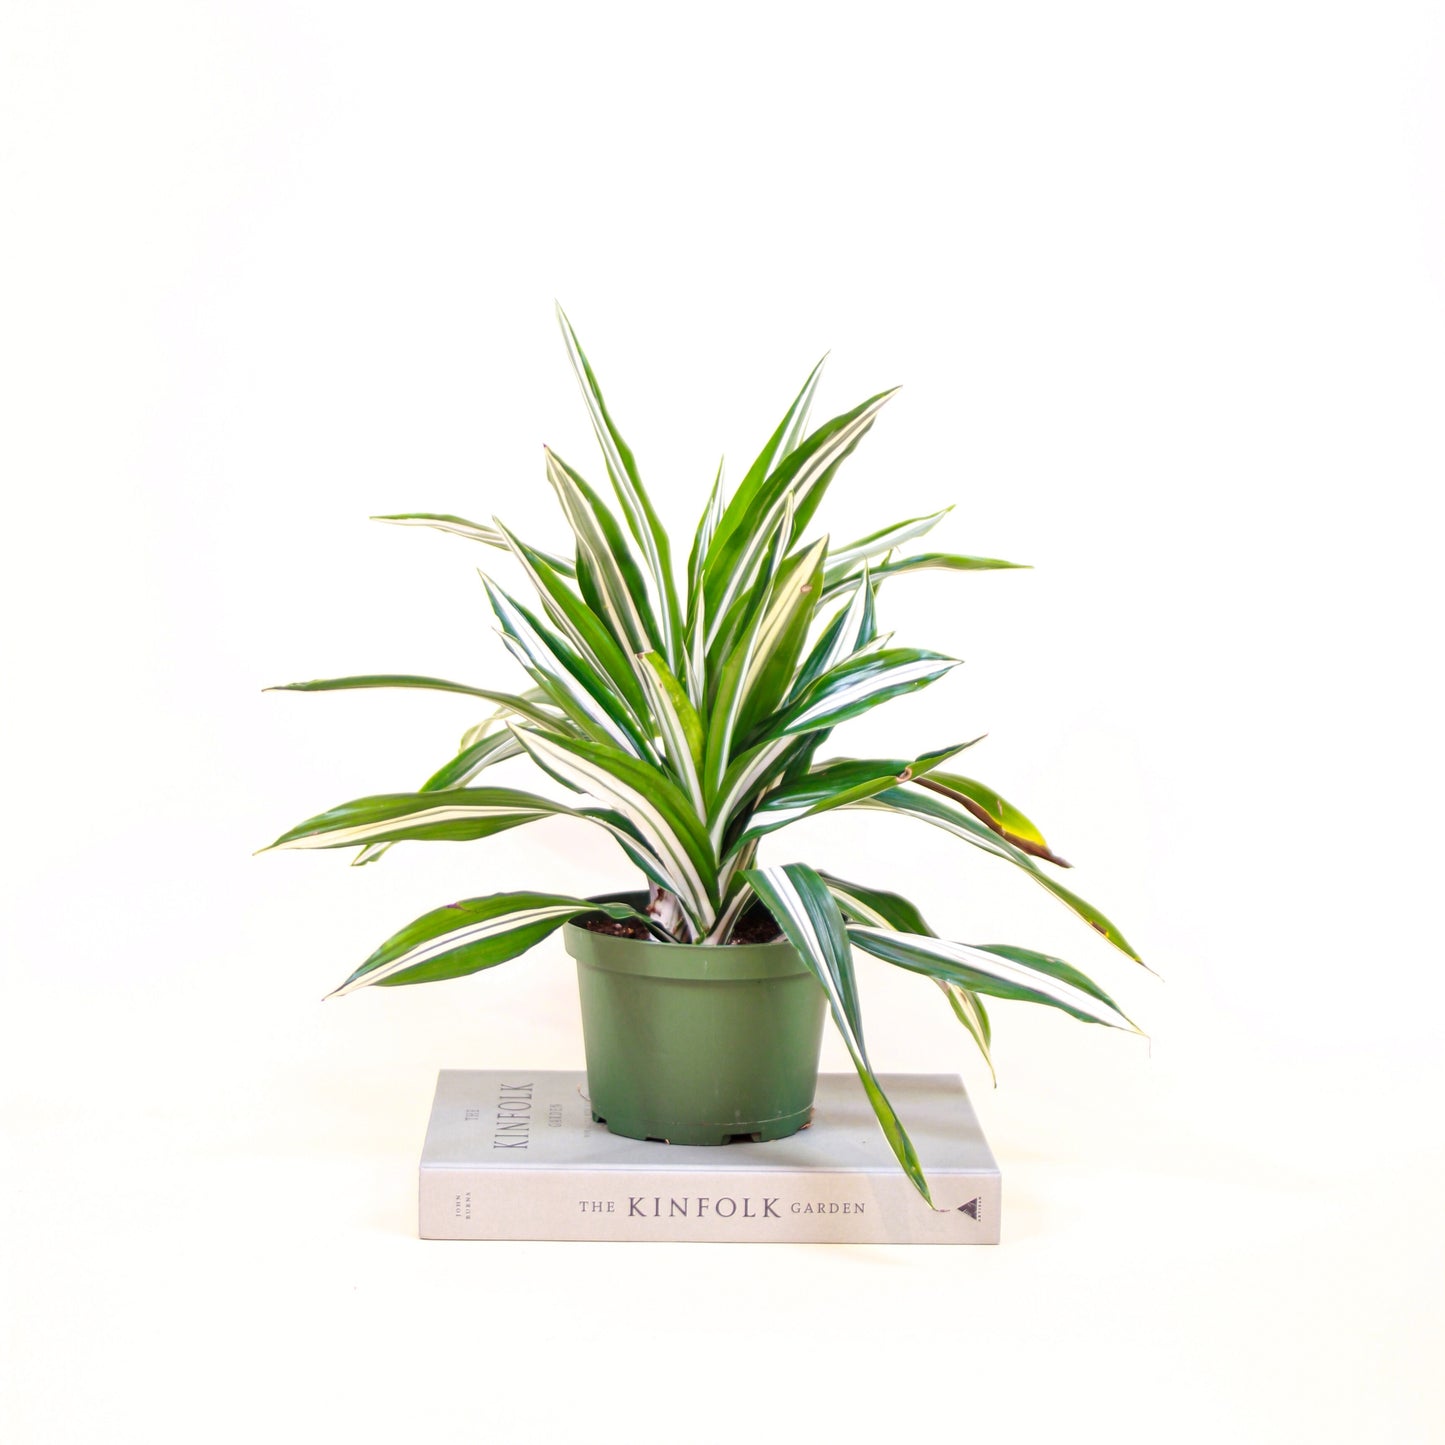 Aboera, Dracaena (Dracaena fragrans) in a 6 inch pot. Indoor plant for sale by Promise Supply for delivery and pickup in Toronto